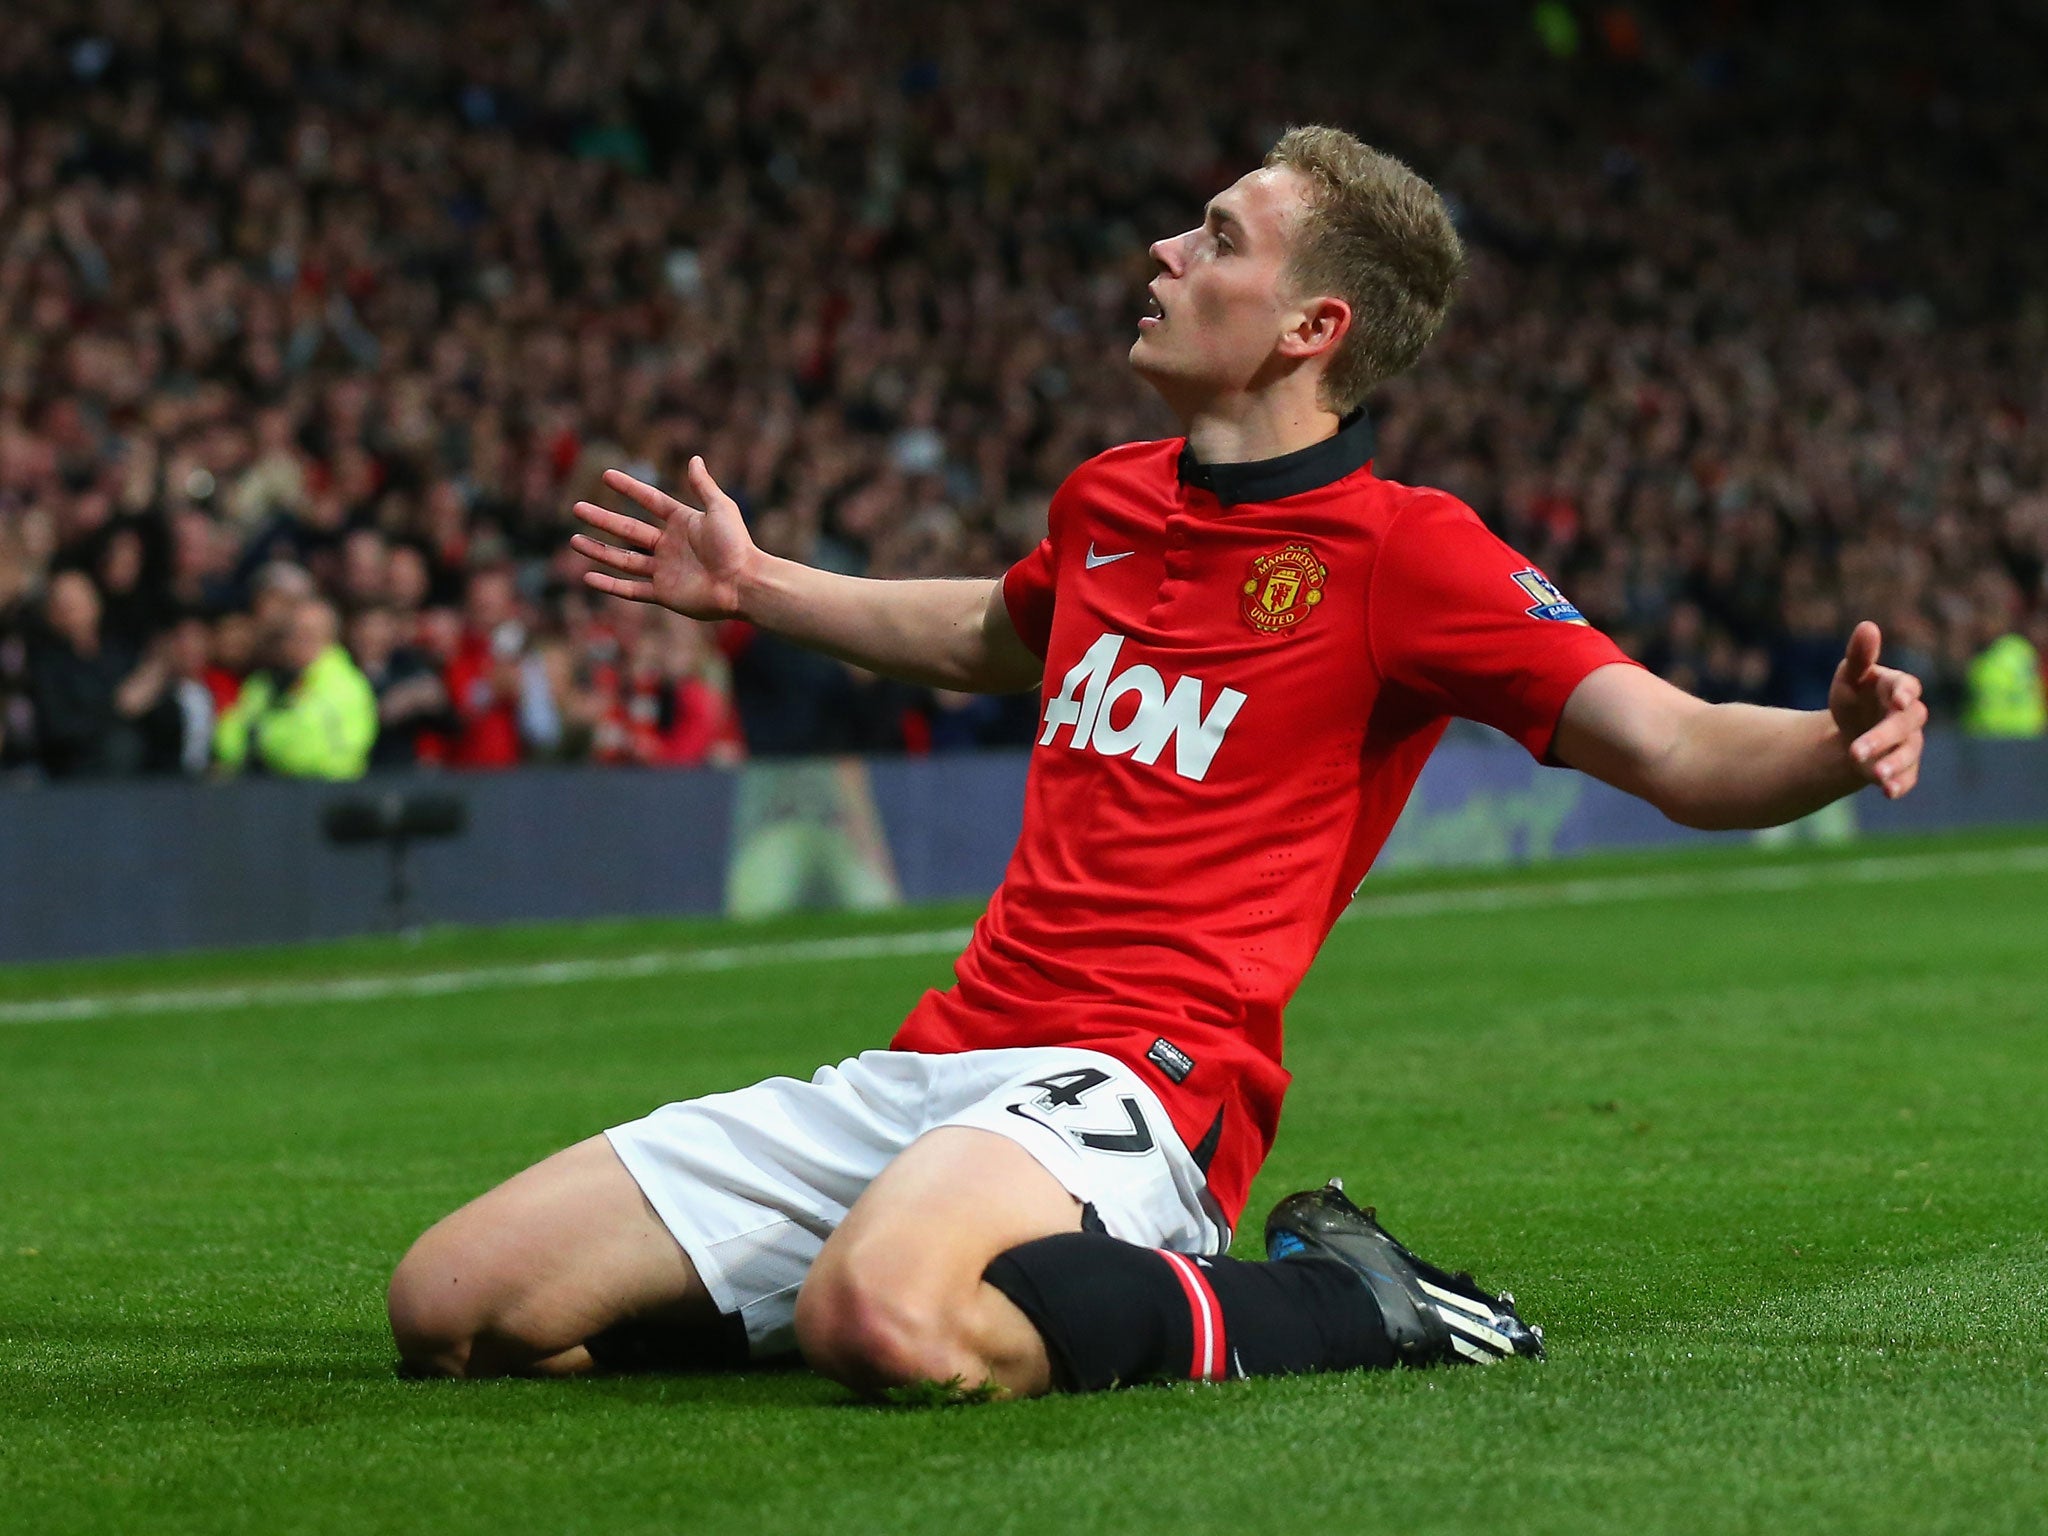 The emergence of James Wilson at Manchester United is based on his ability, not his nationality